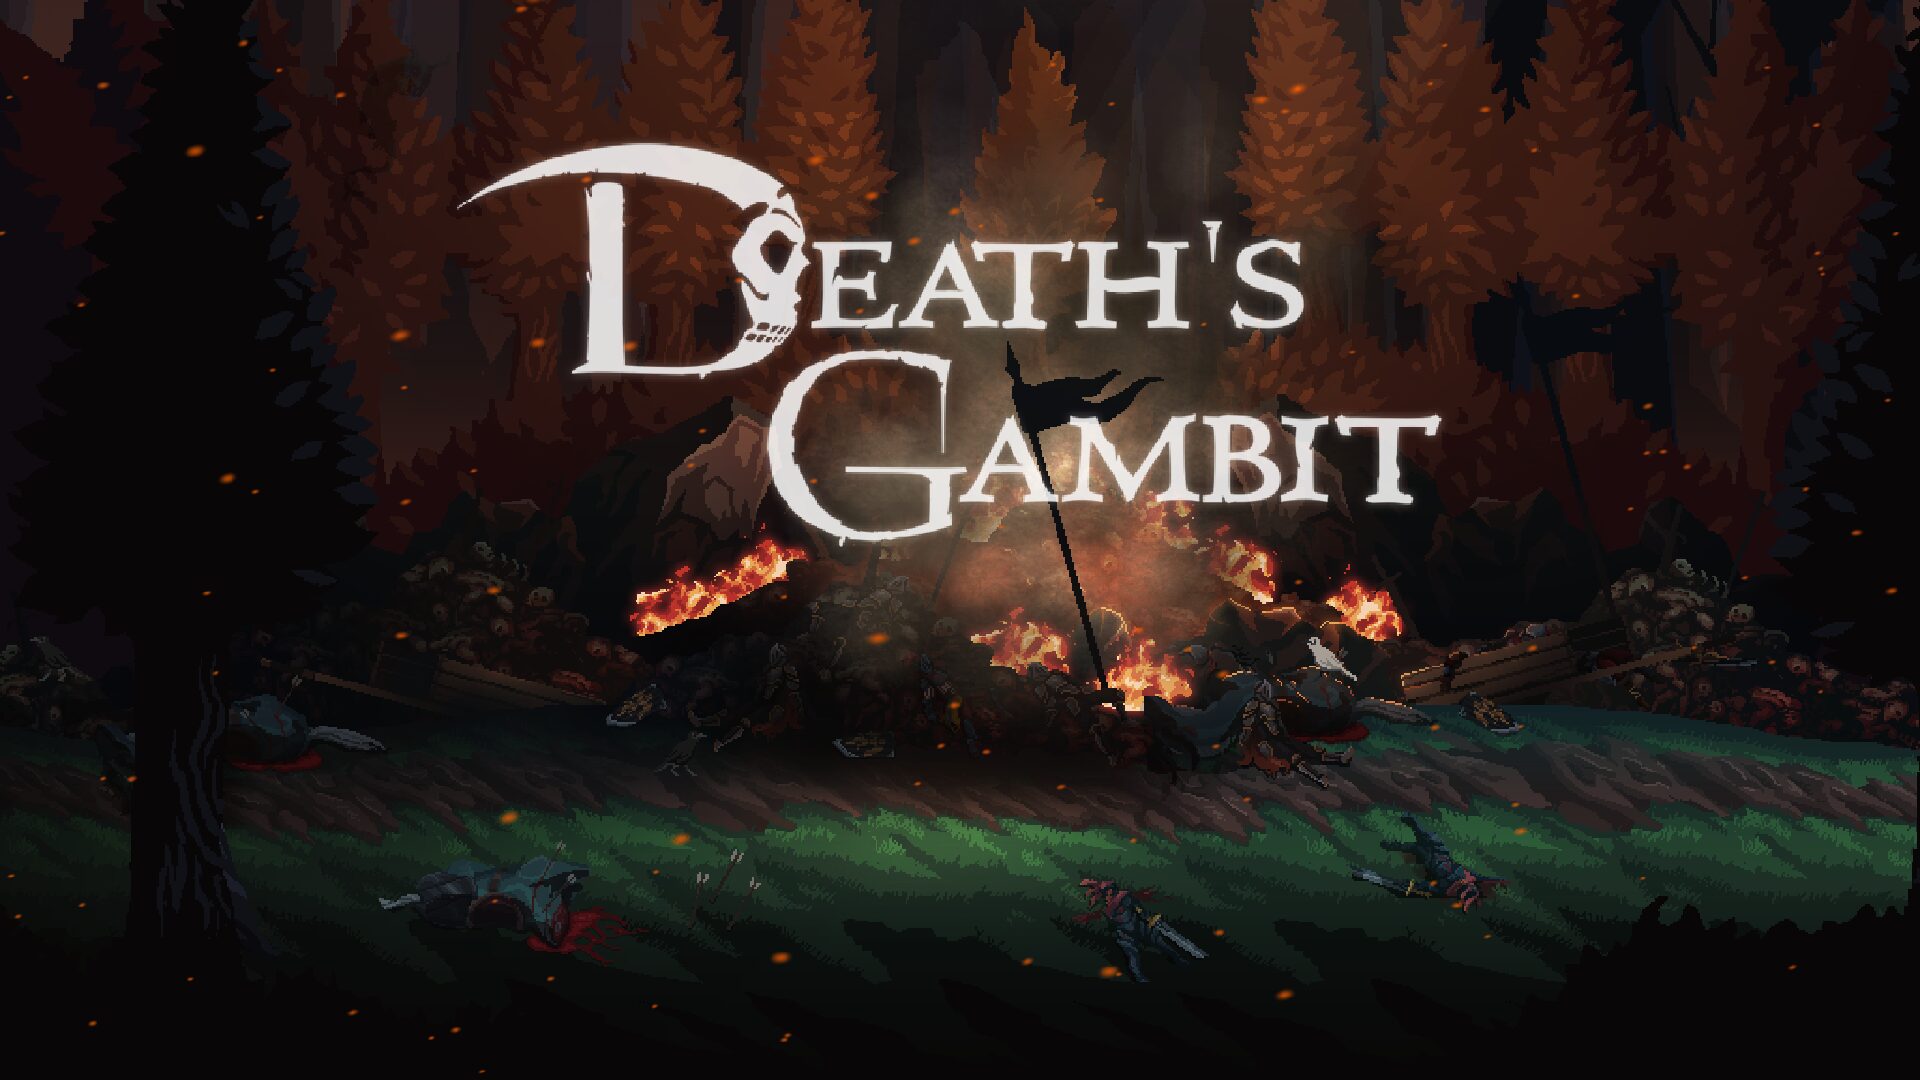 Death’s Gambit review: the Dark Souls of Metroidvanias?